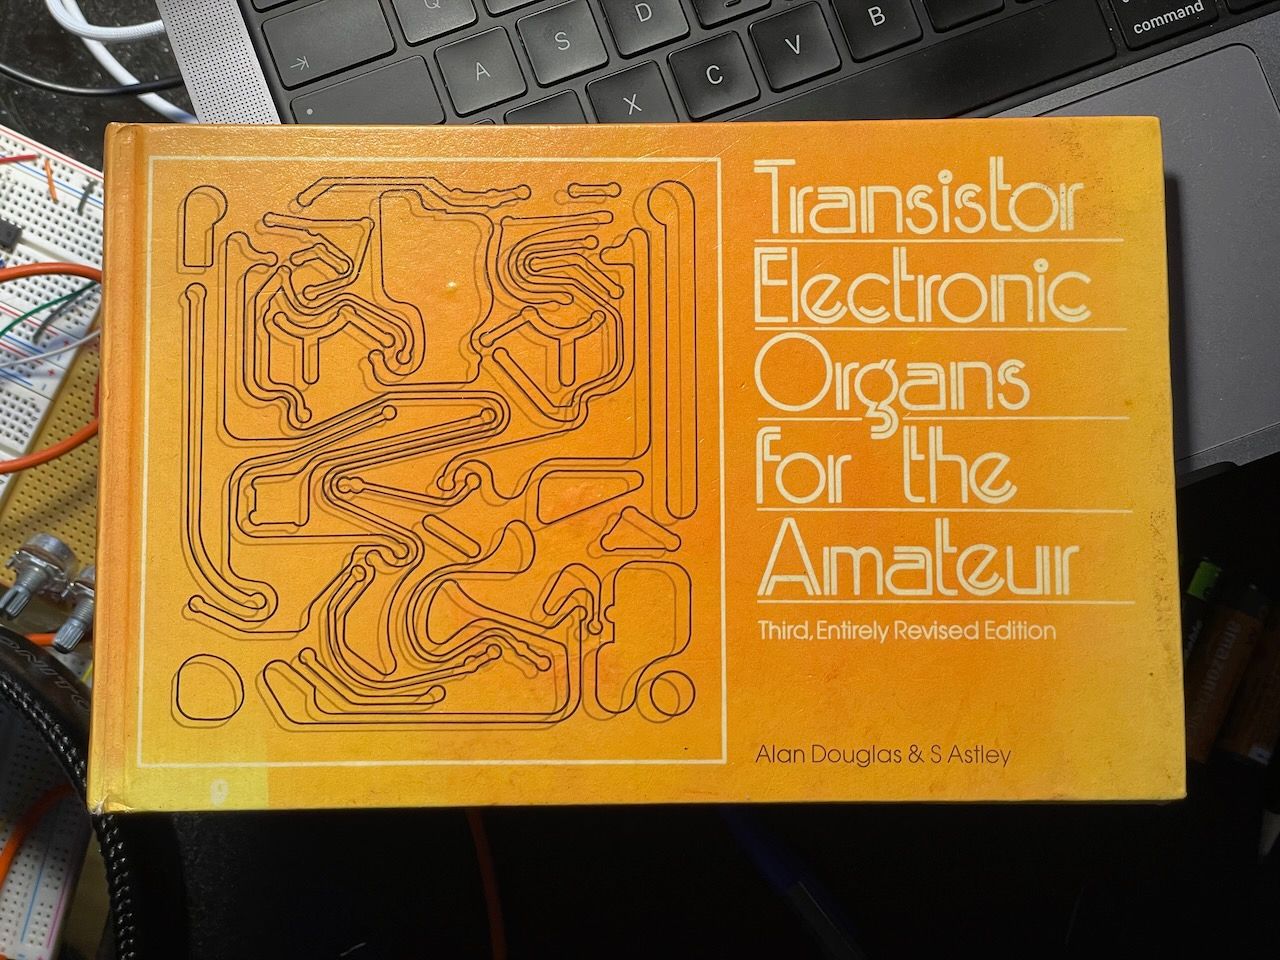 “Transistor Electronic Organs for the Amateur” book cover